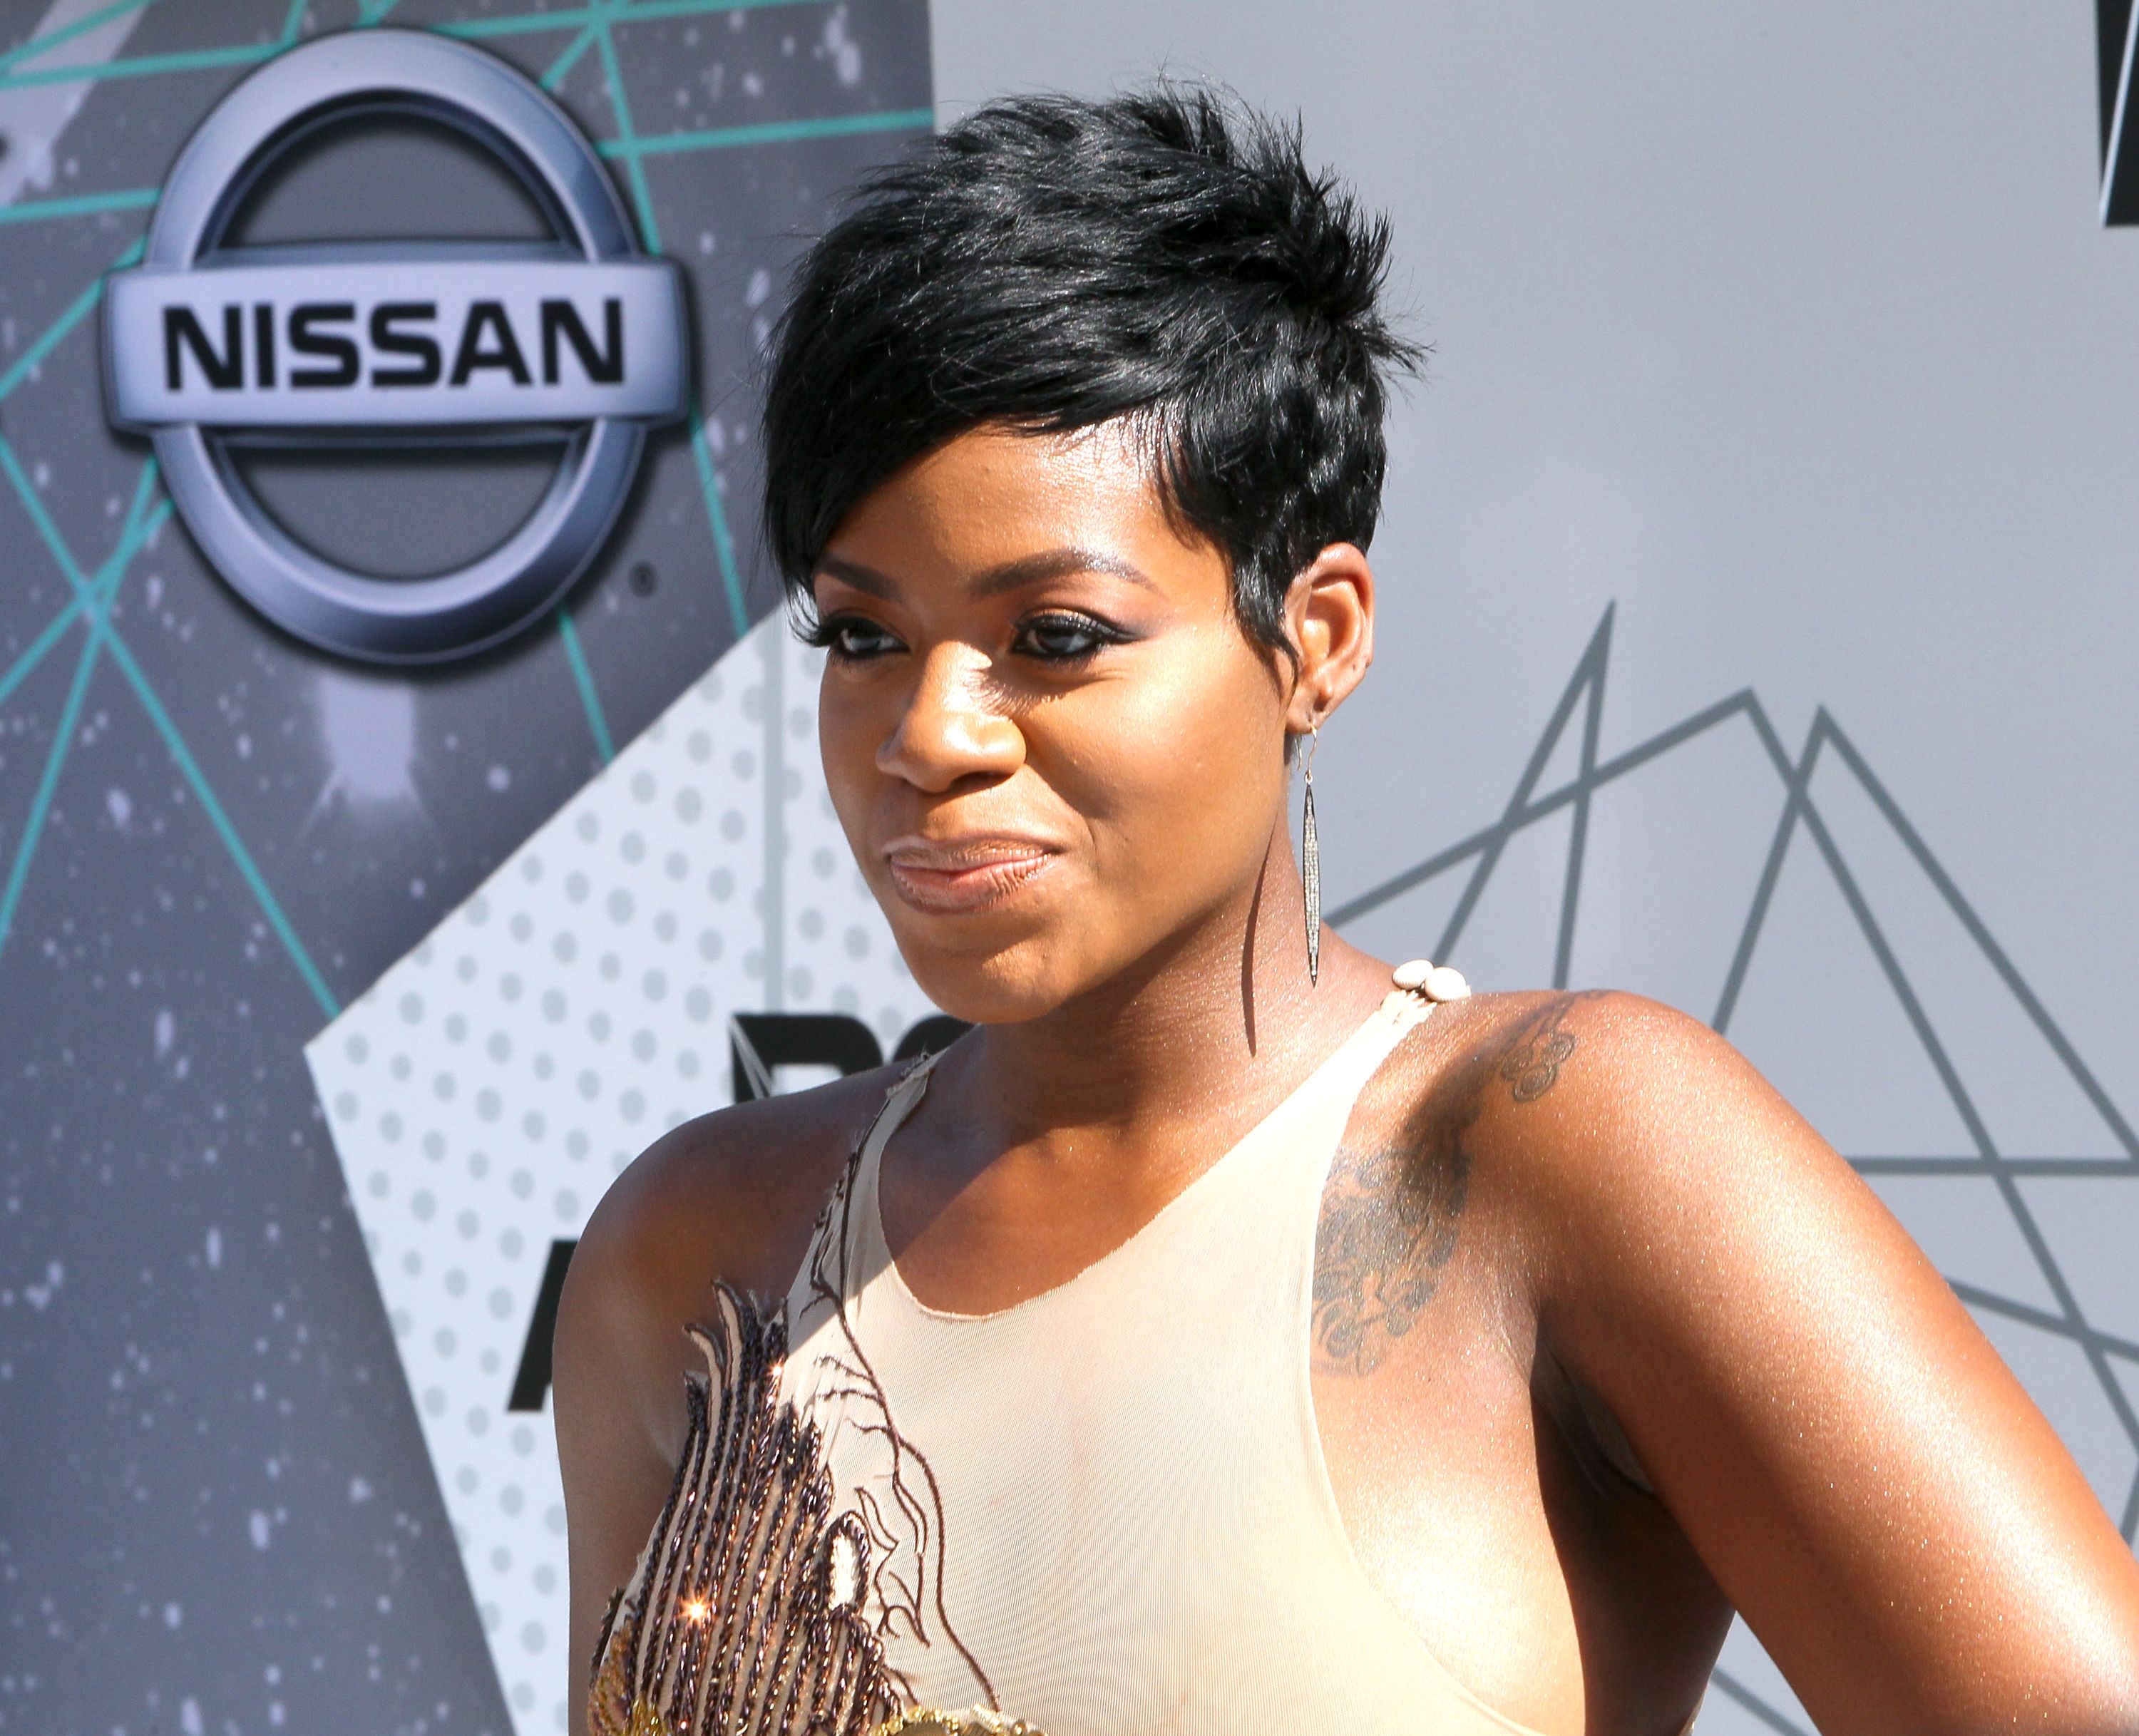 Singer Fantasia Barrino at the 2016 BET Awards on June 26, 2016. | Photo: Getty Images